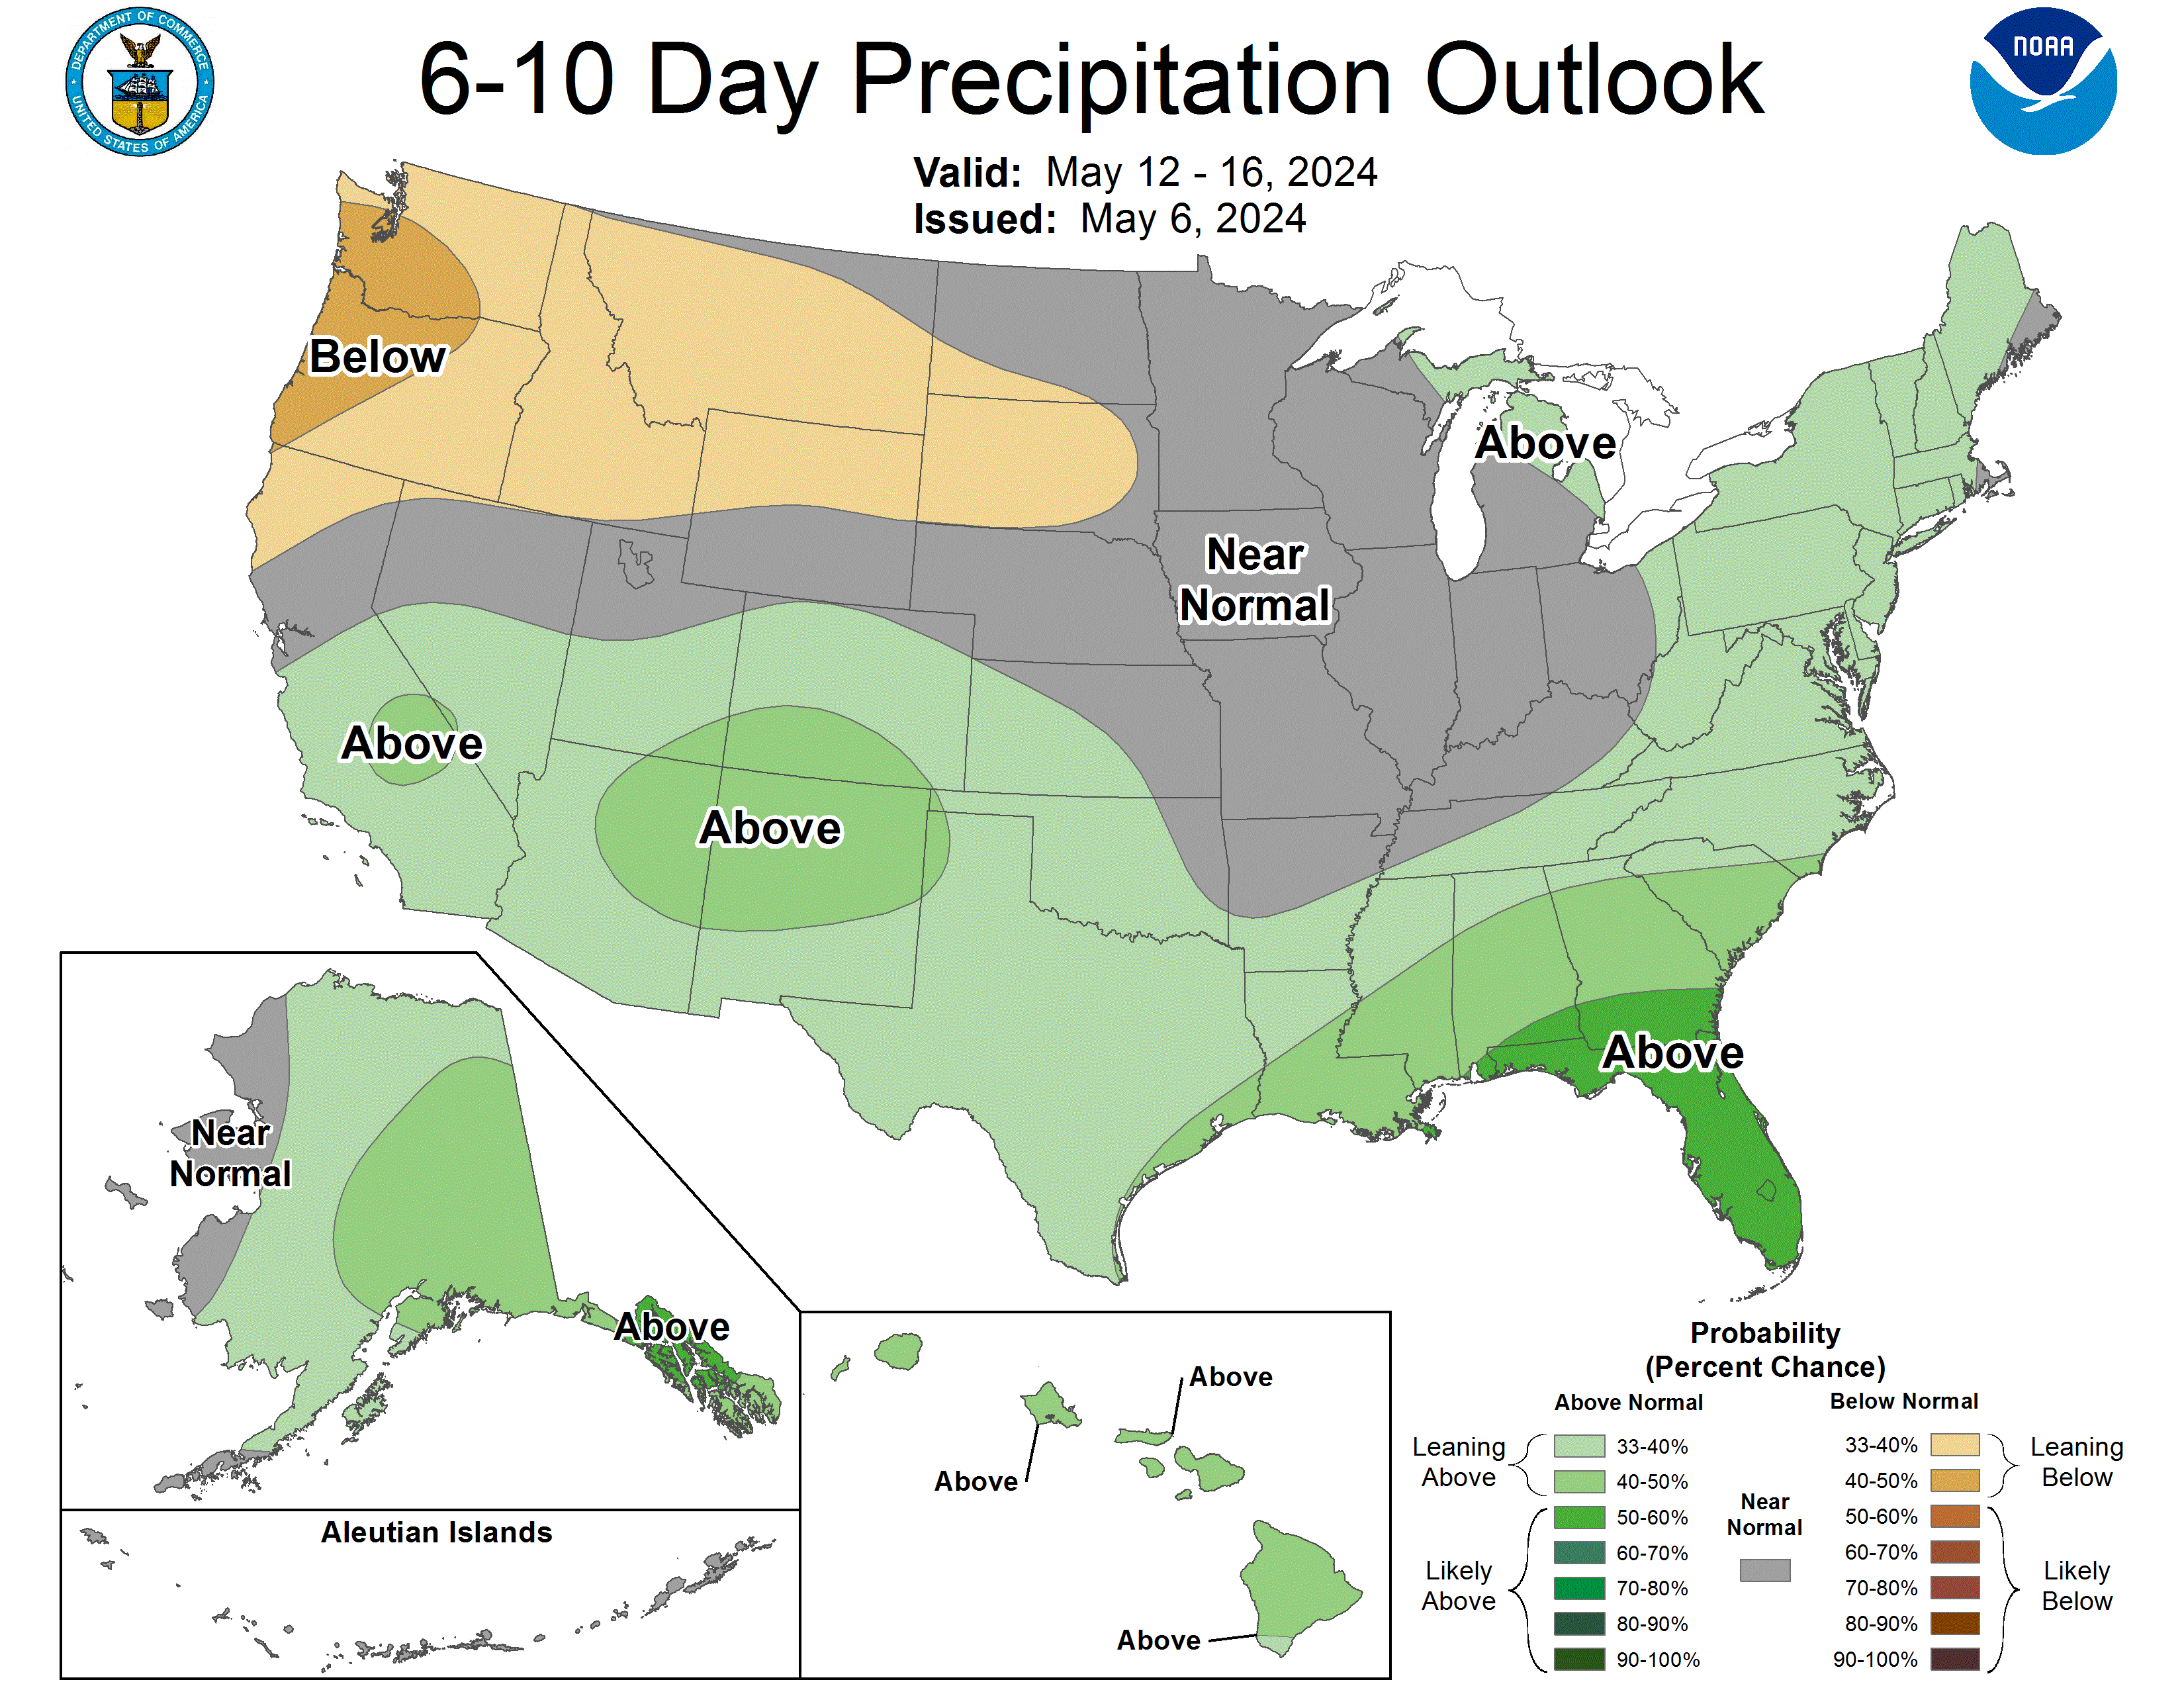 NOAA 6-10 Day Precipitation Outlook for Mammoth Mountain and Mammoth Lakes